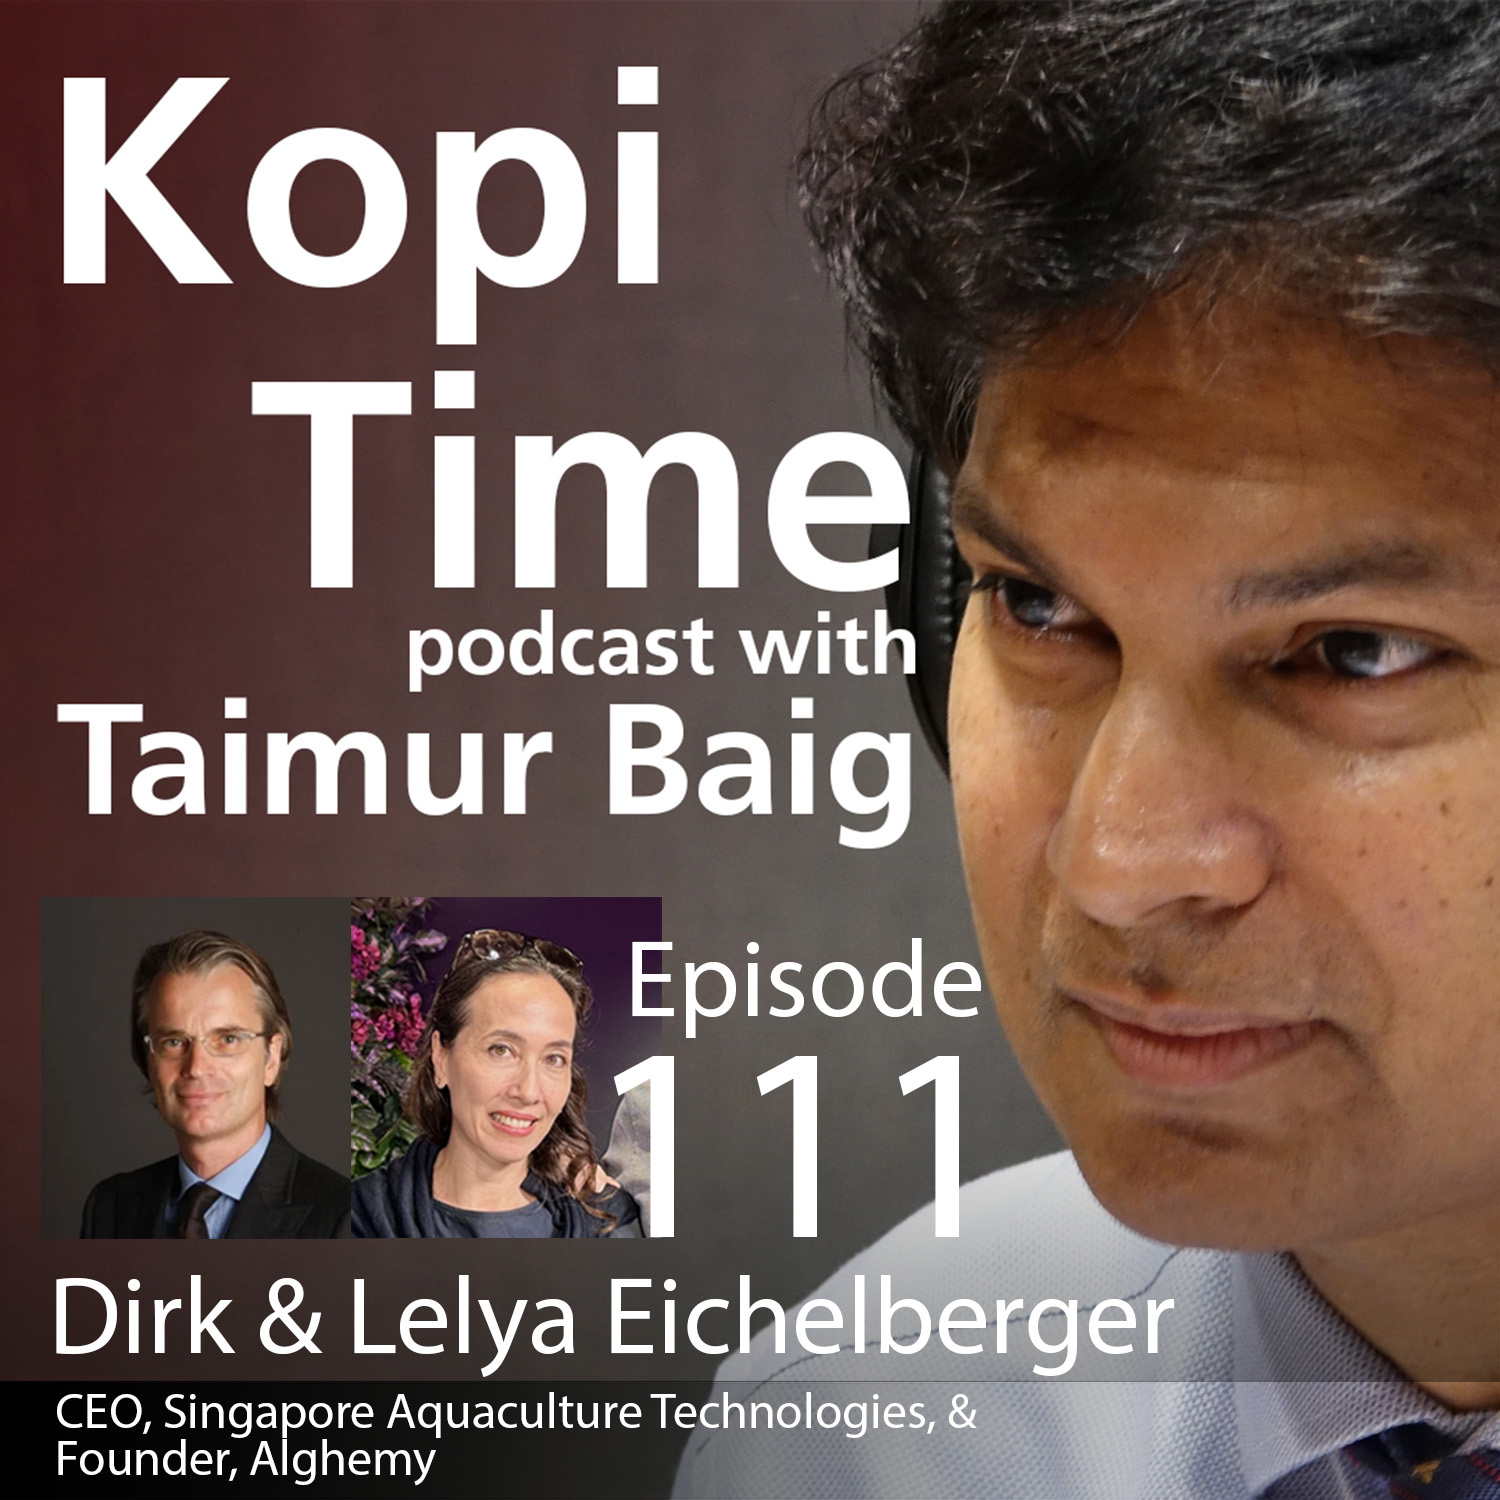 Kopi Time E111 - Dirk and Lelya Eichelberger on Sustainable Fishing and its Offshoots